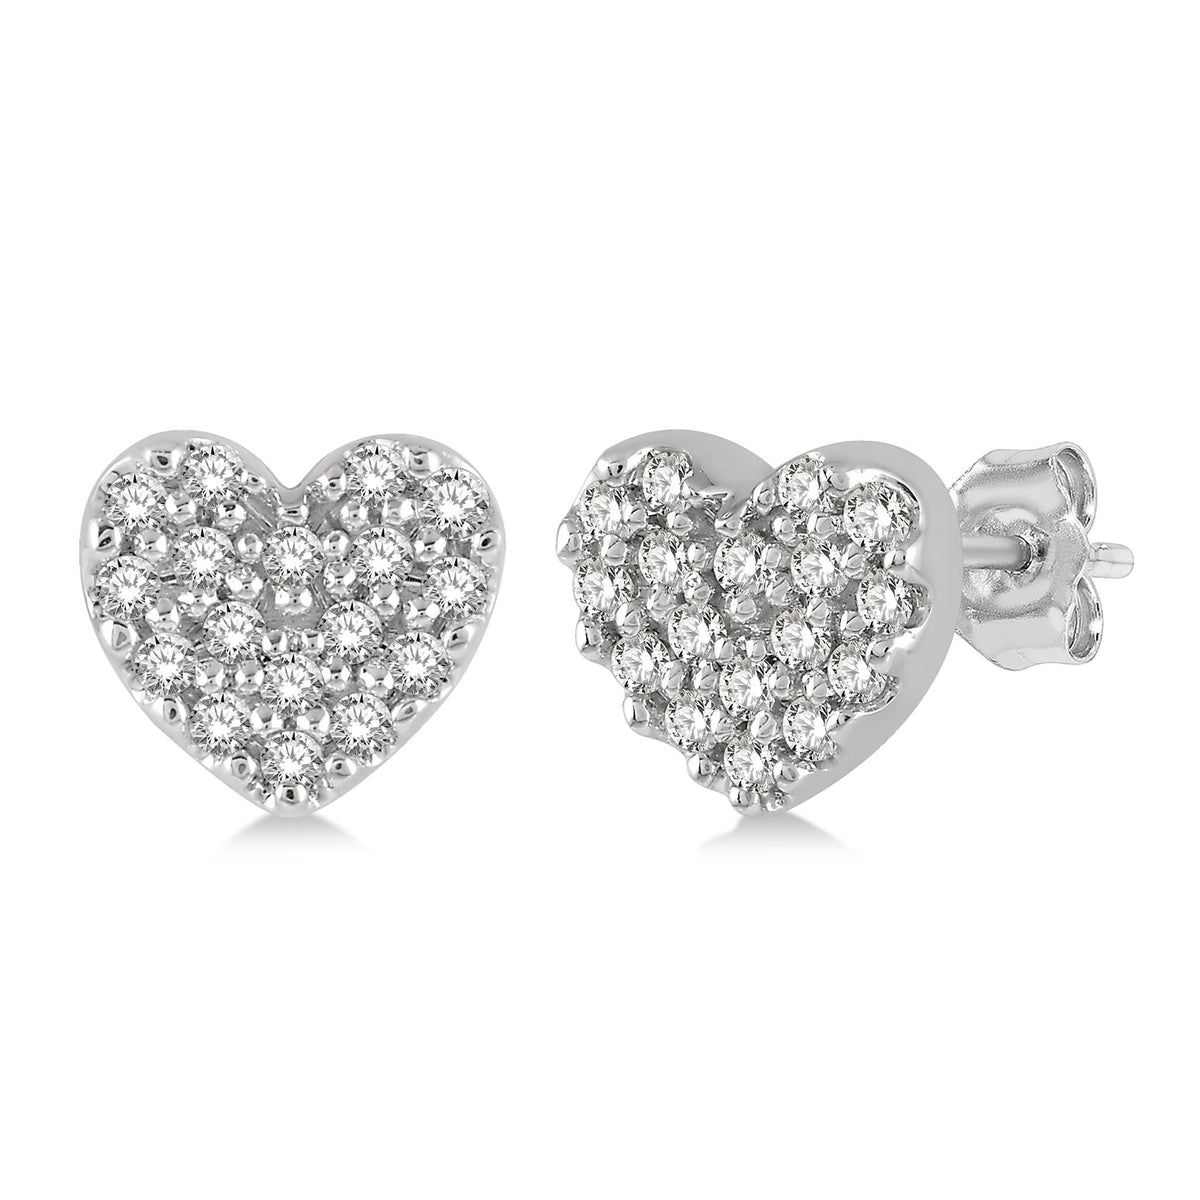 Lasker Petites-10Kt White Gold Heart Stud Earrings with 0.10cttw Natural Diamonds